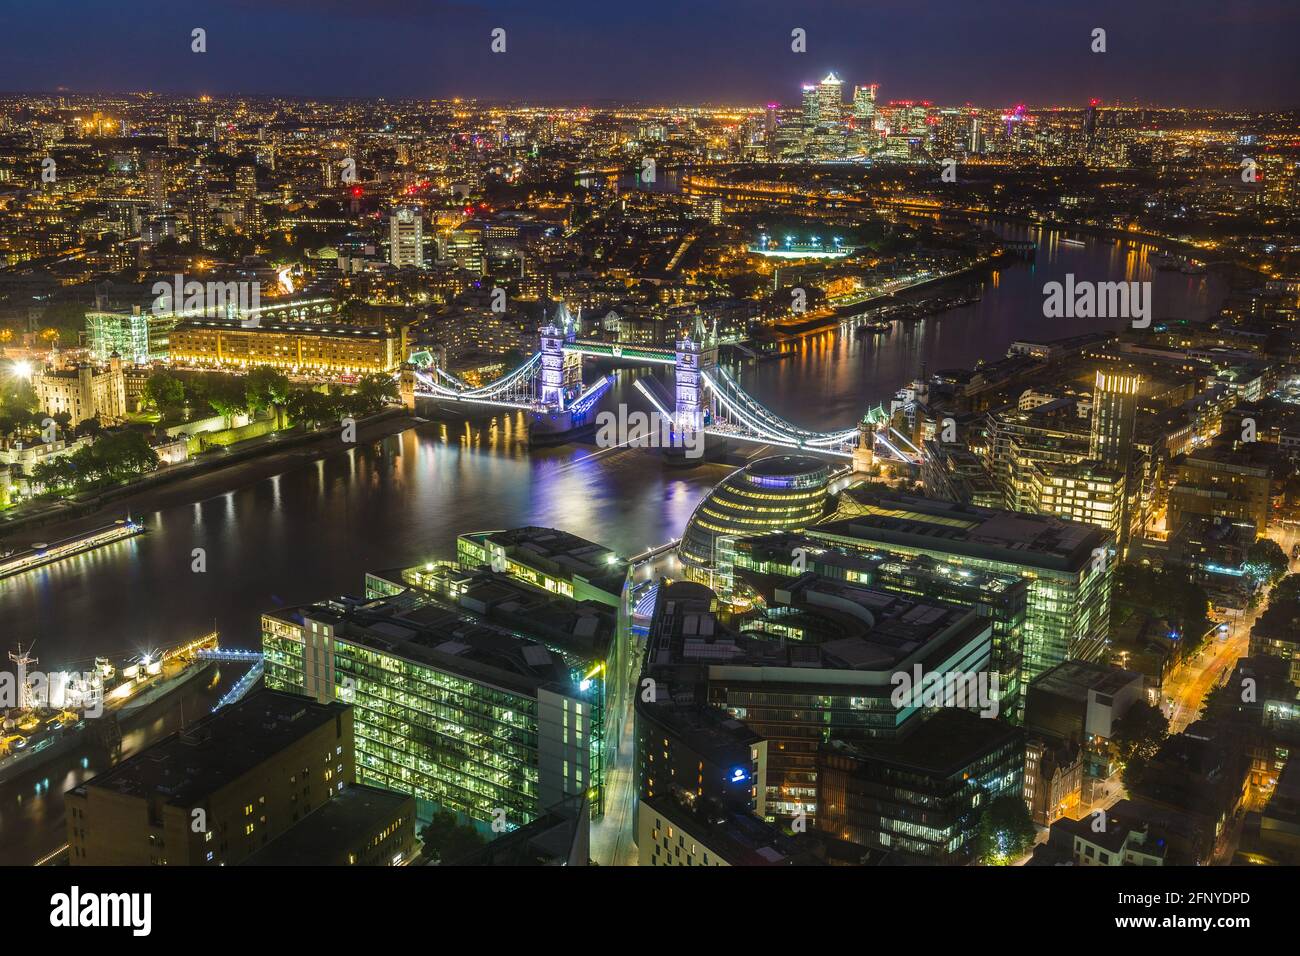 London skyline at night with illuminated architecture and landmarks such as Tower Bridge Stock Photo